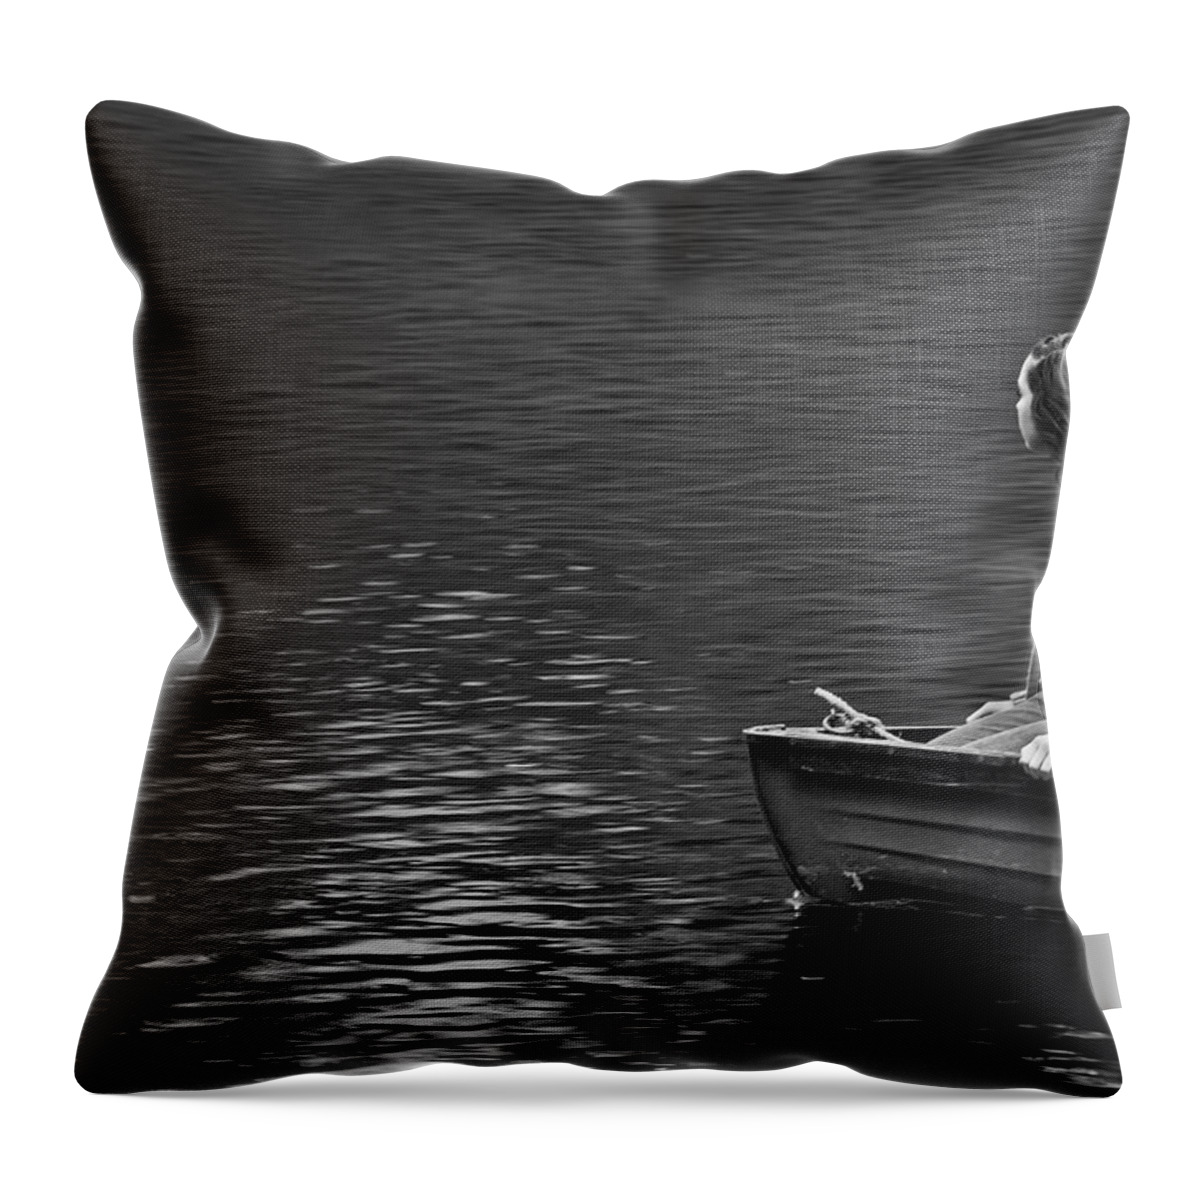 Lady Throw Pillow featuring the photograph Broken Promises by Evelina Kremsdorf